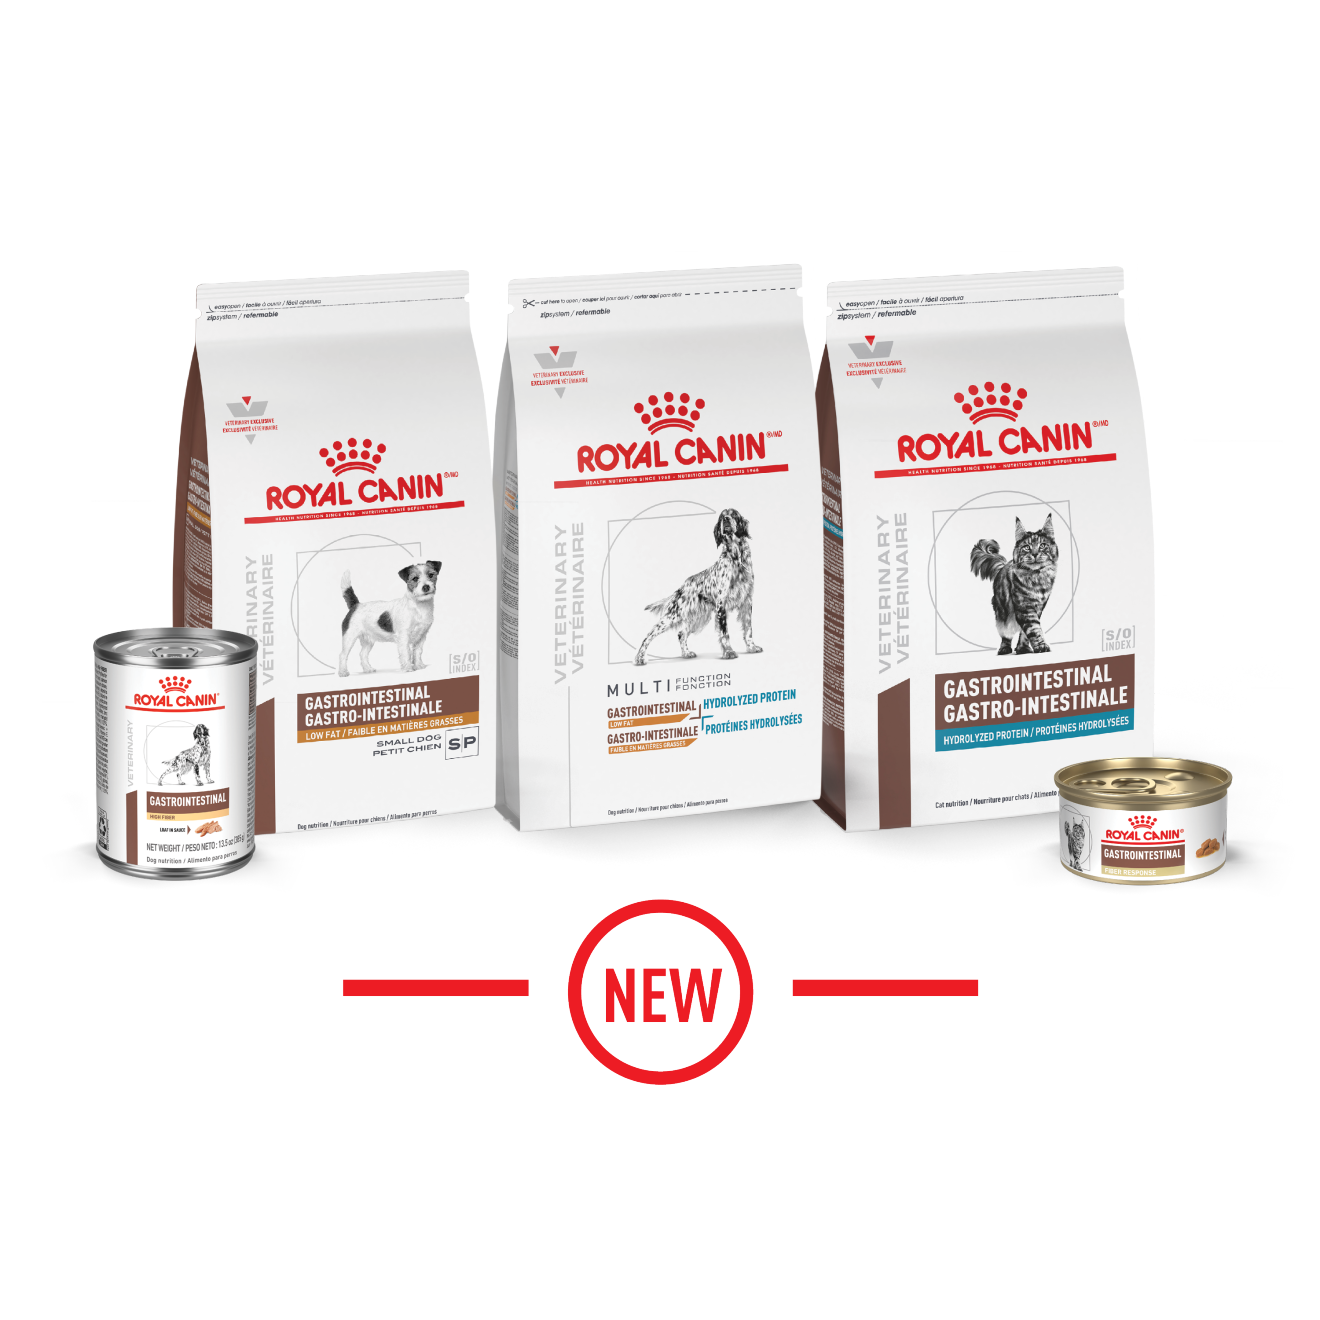 Royal Canin Gastrointestinal diets for cats and dogs. 